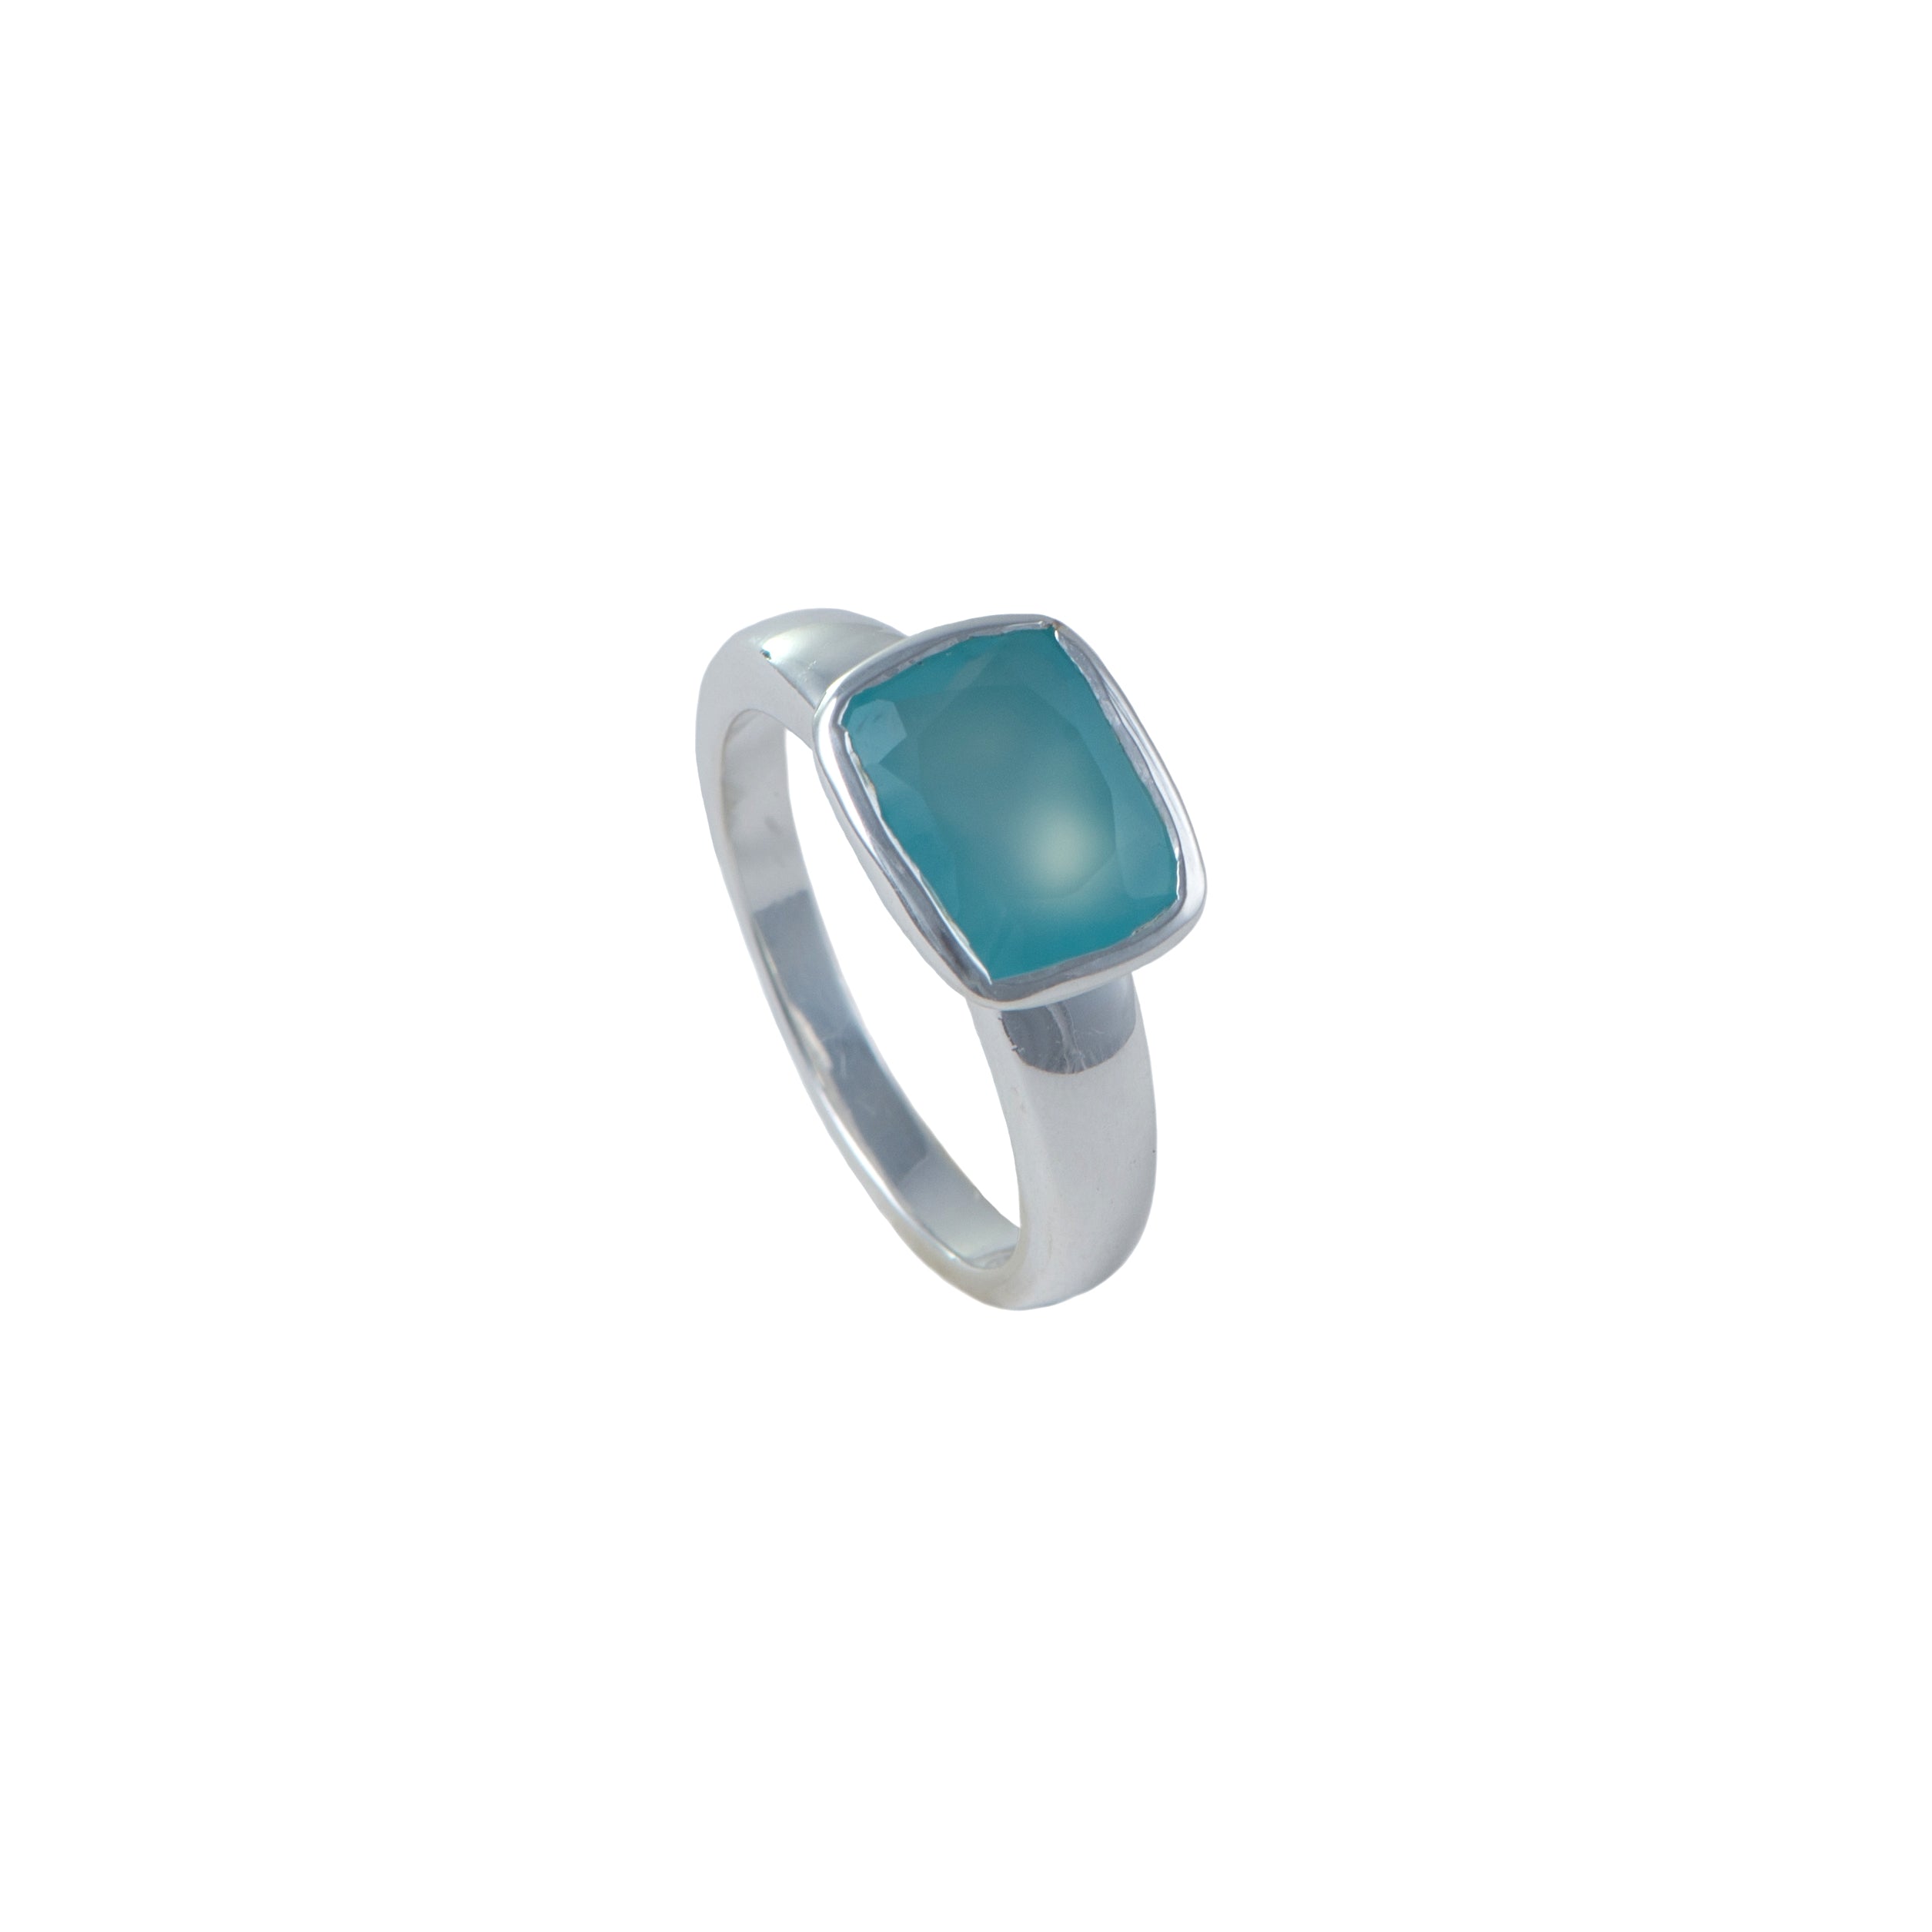 Faceted Rectangular Cut Natural Gemstone Sterling Silver Ring - Aqua Chalcedony